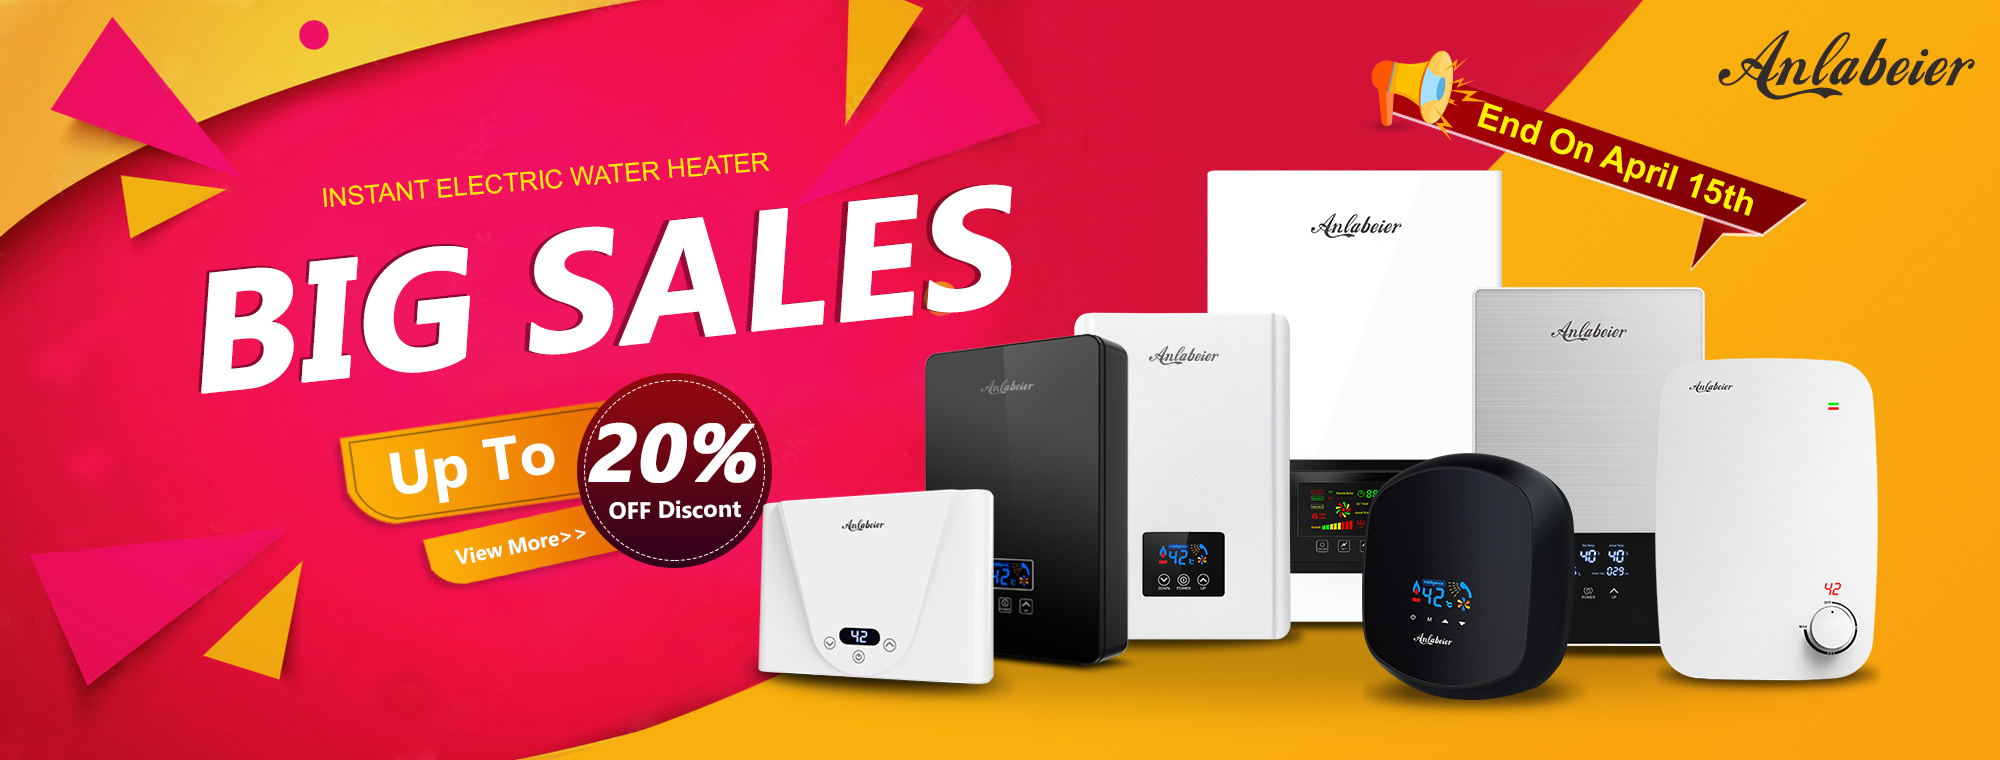 20% OFF ELECTRIC WATER HEATER